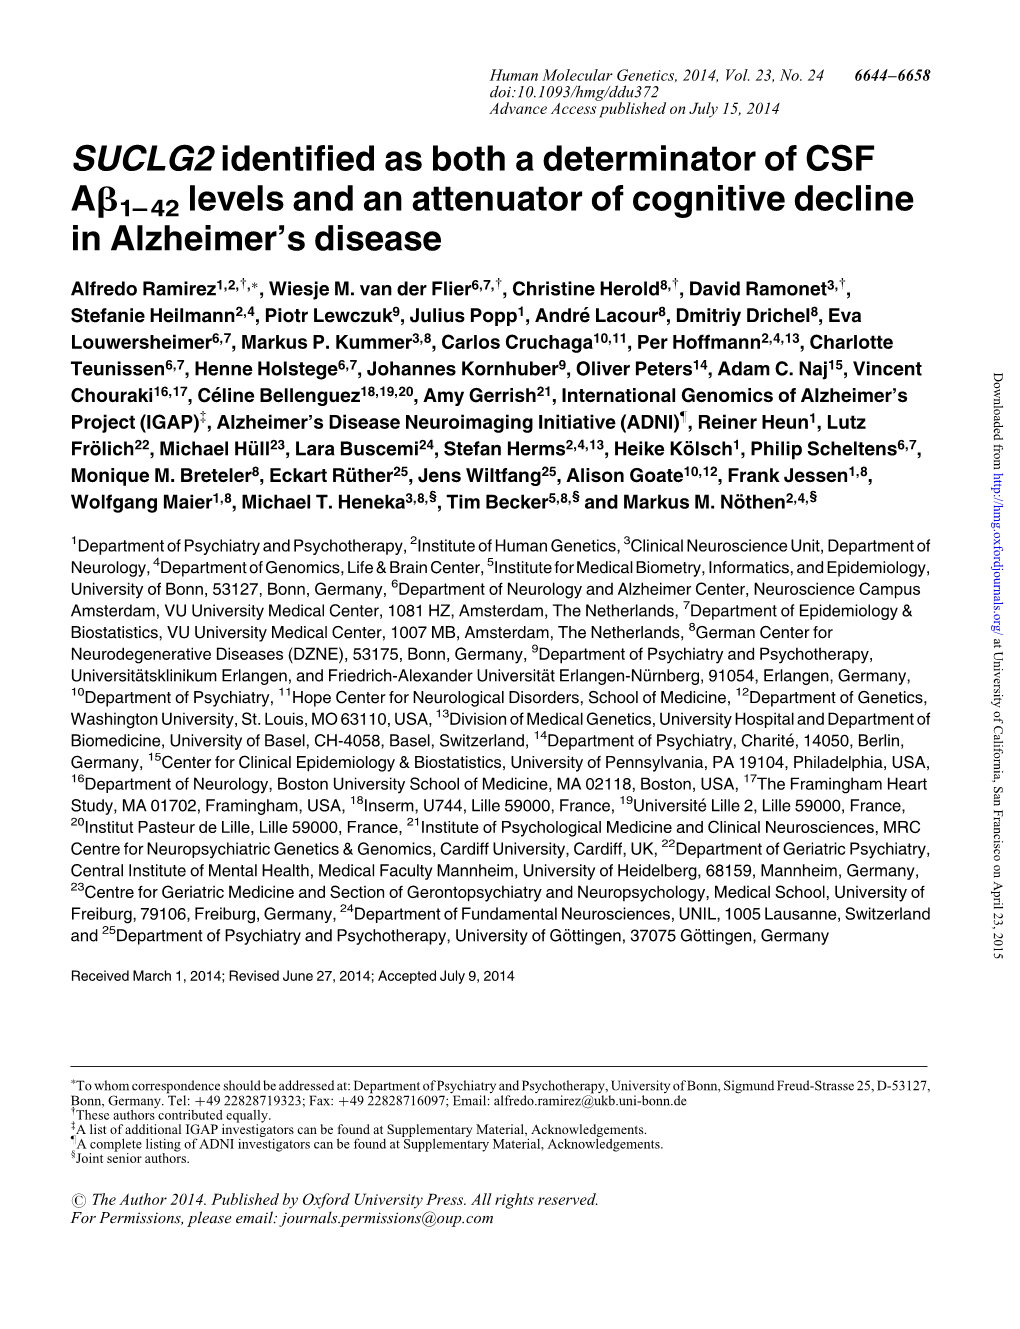 SUCLG2 Identified As Both a Determinator of CSF Ab1– 42 Levels and an Attenuator of Cognitive Decline in Alzheimer's Disease